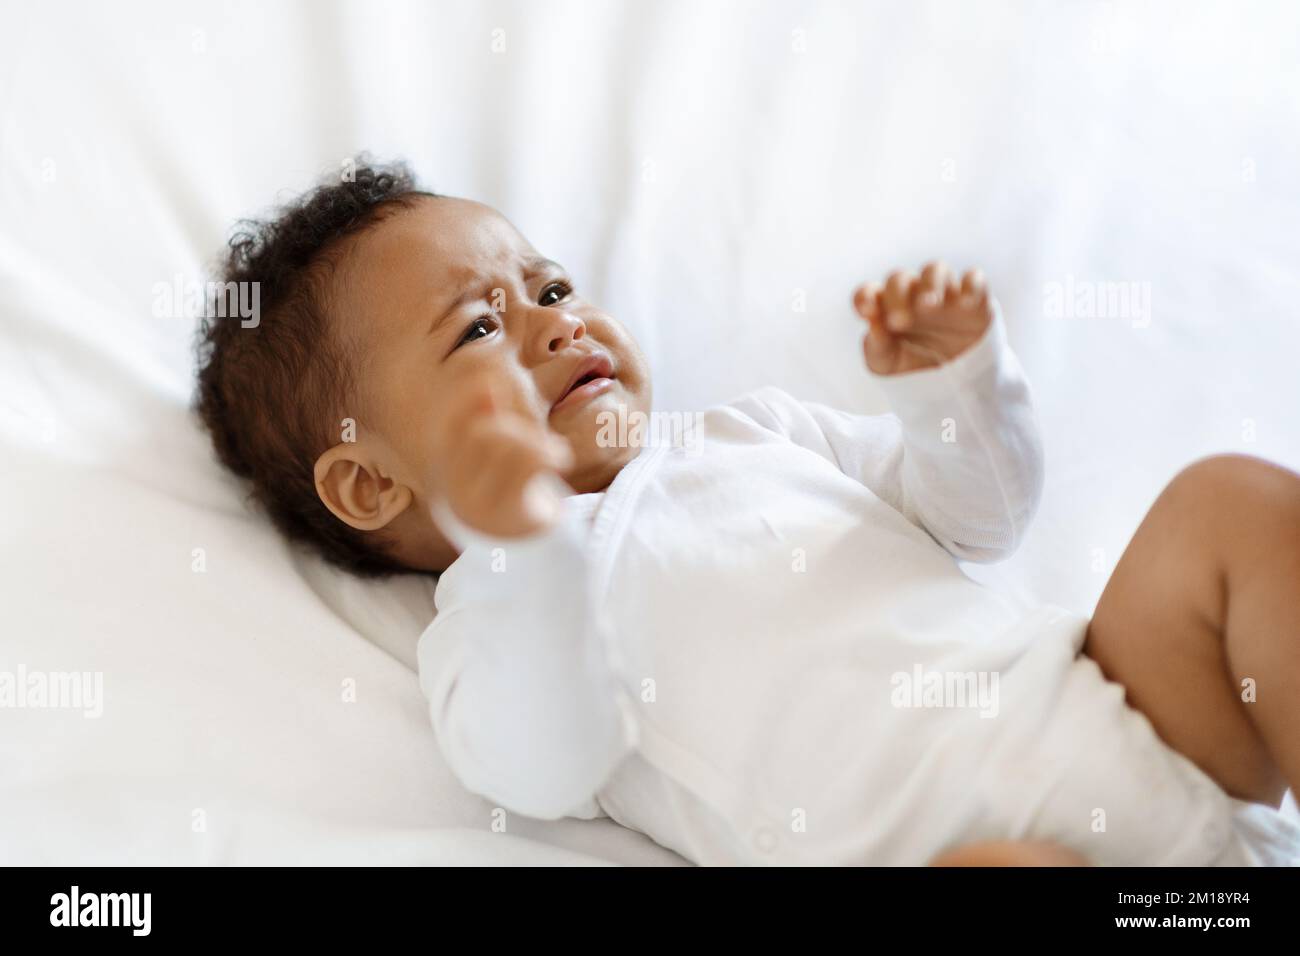 Portrait Of Crying Little Black Baby Wearing Bodysuit Lying On Bed Stock Photo